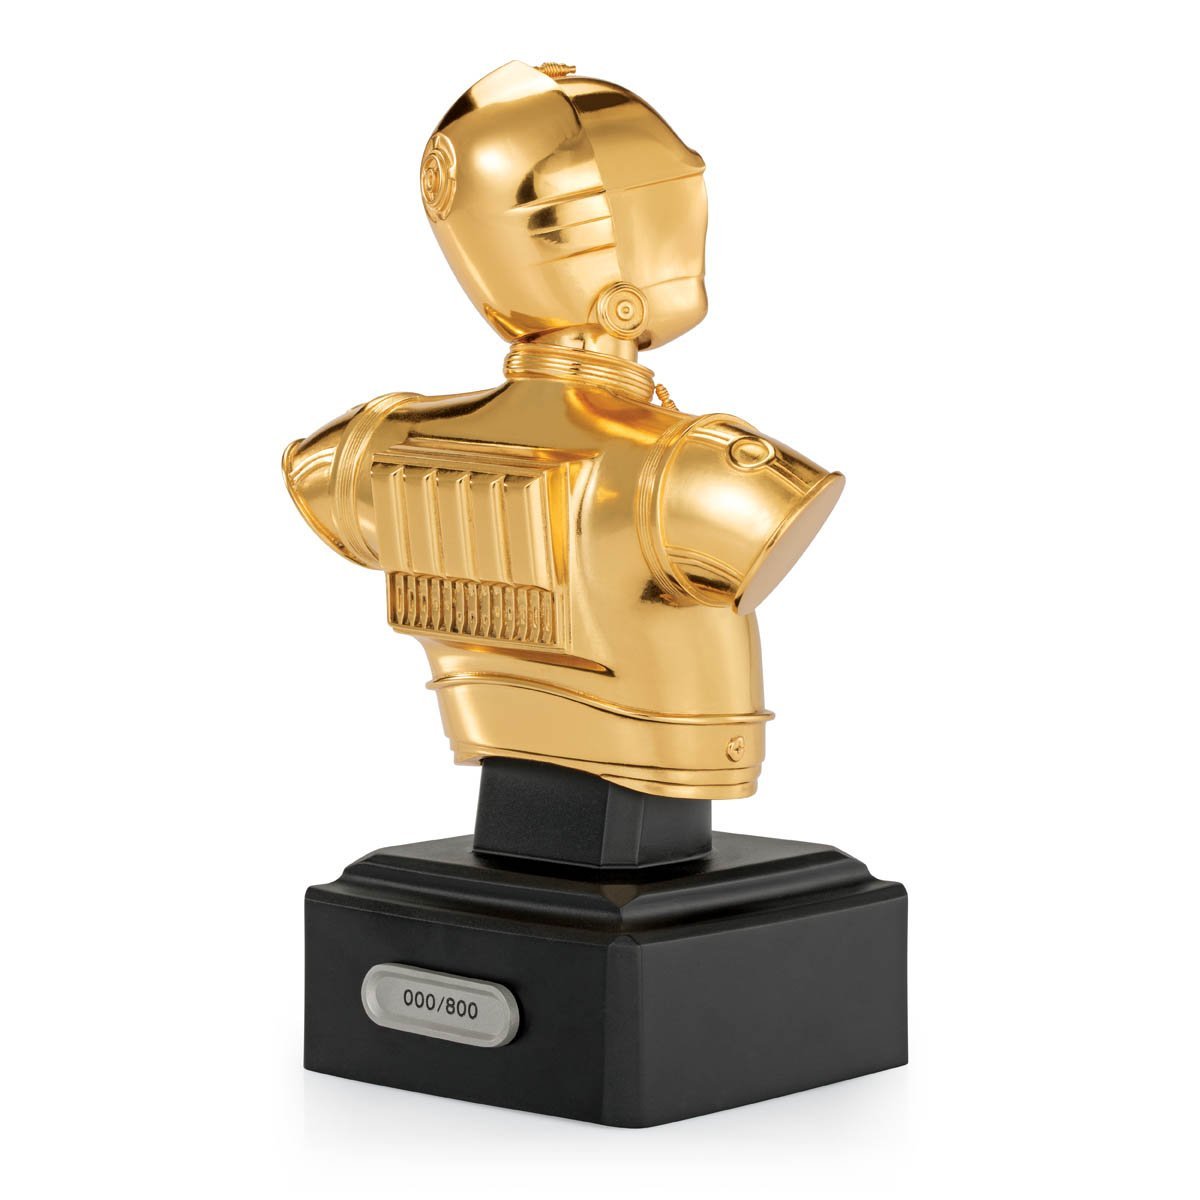 Star Wars C-3PO Limited Edition Bust - Collectible Gift